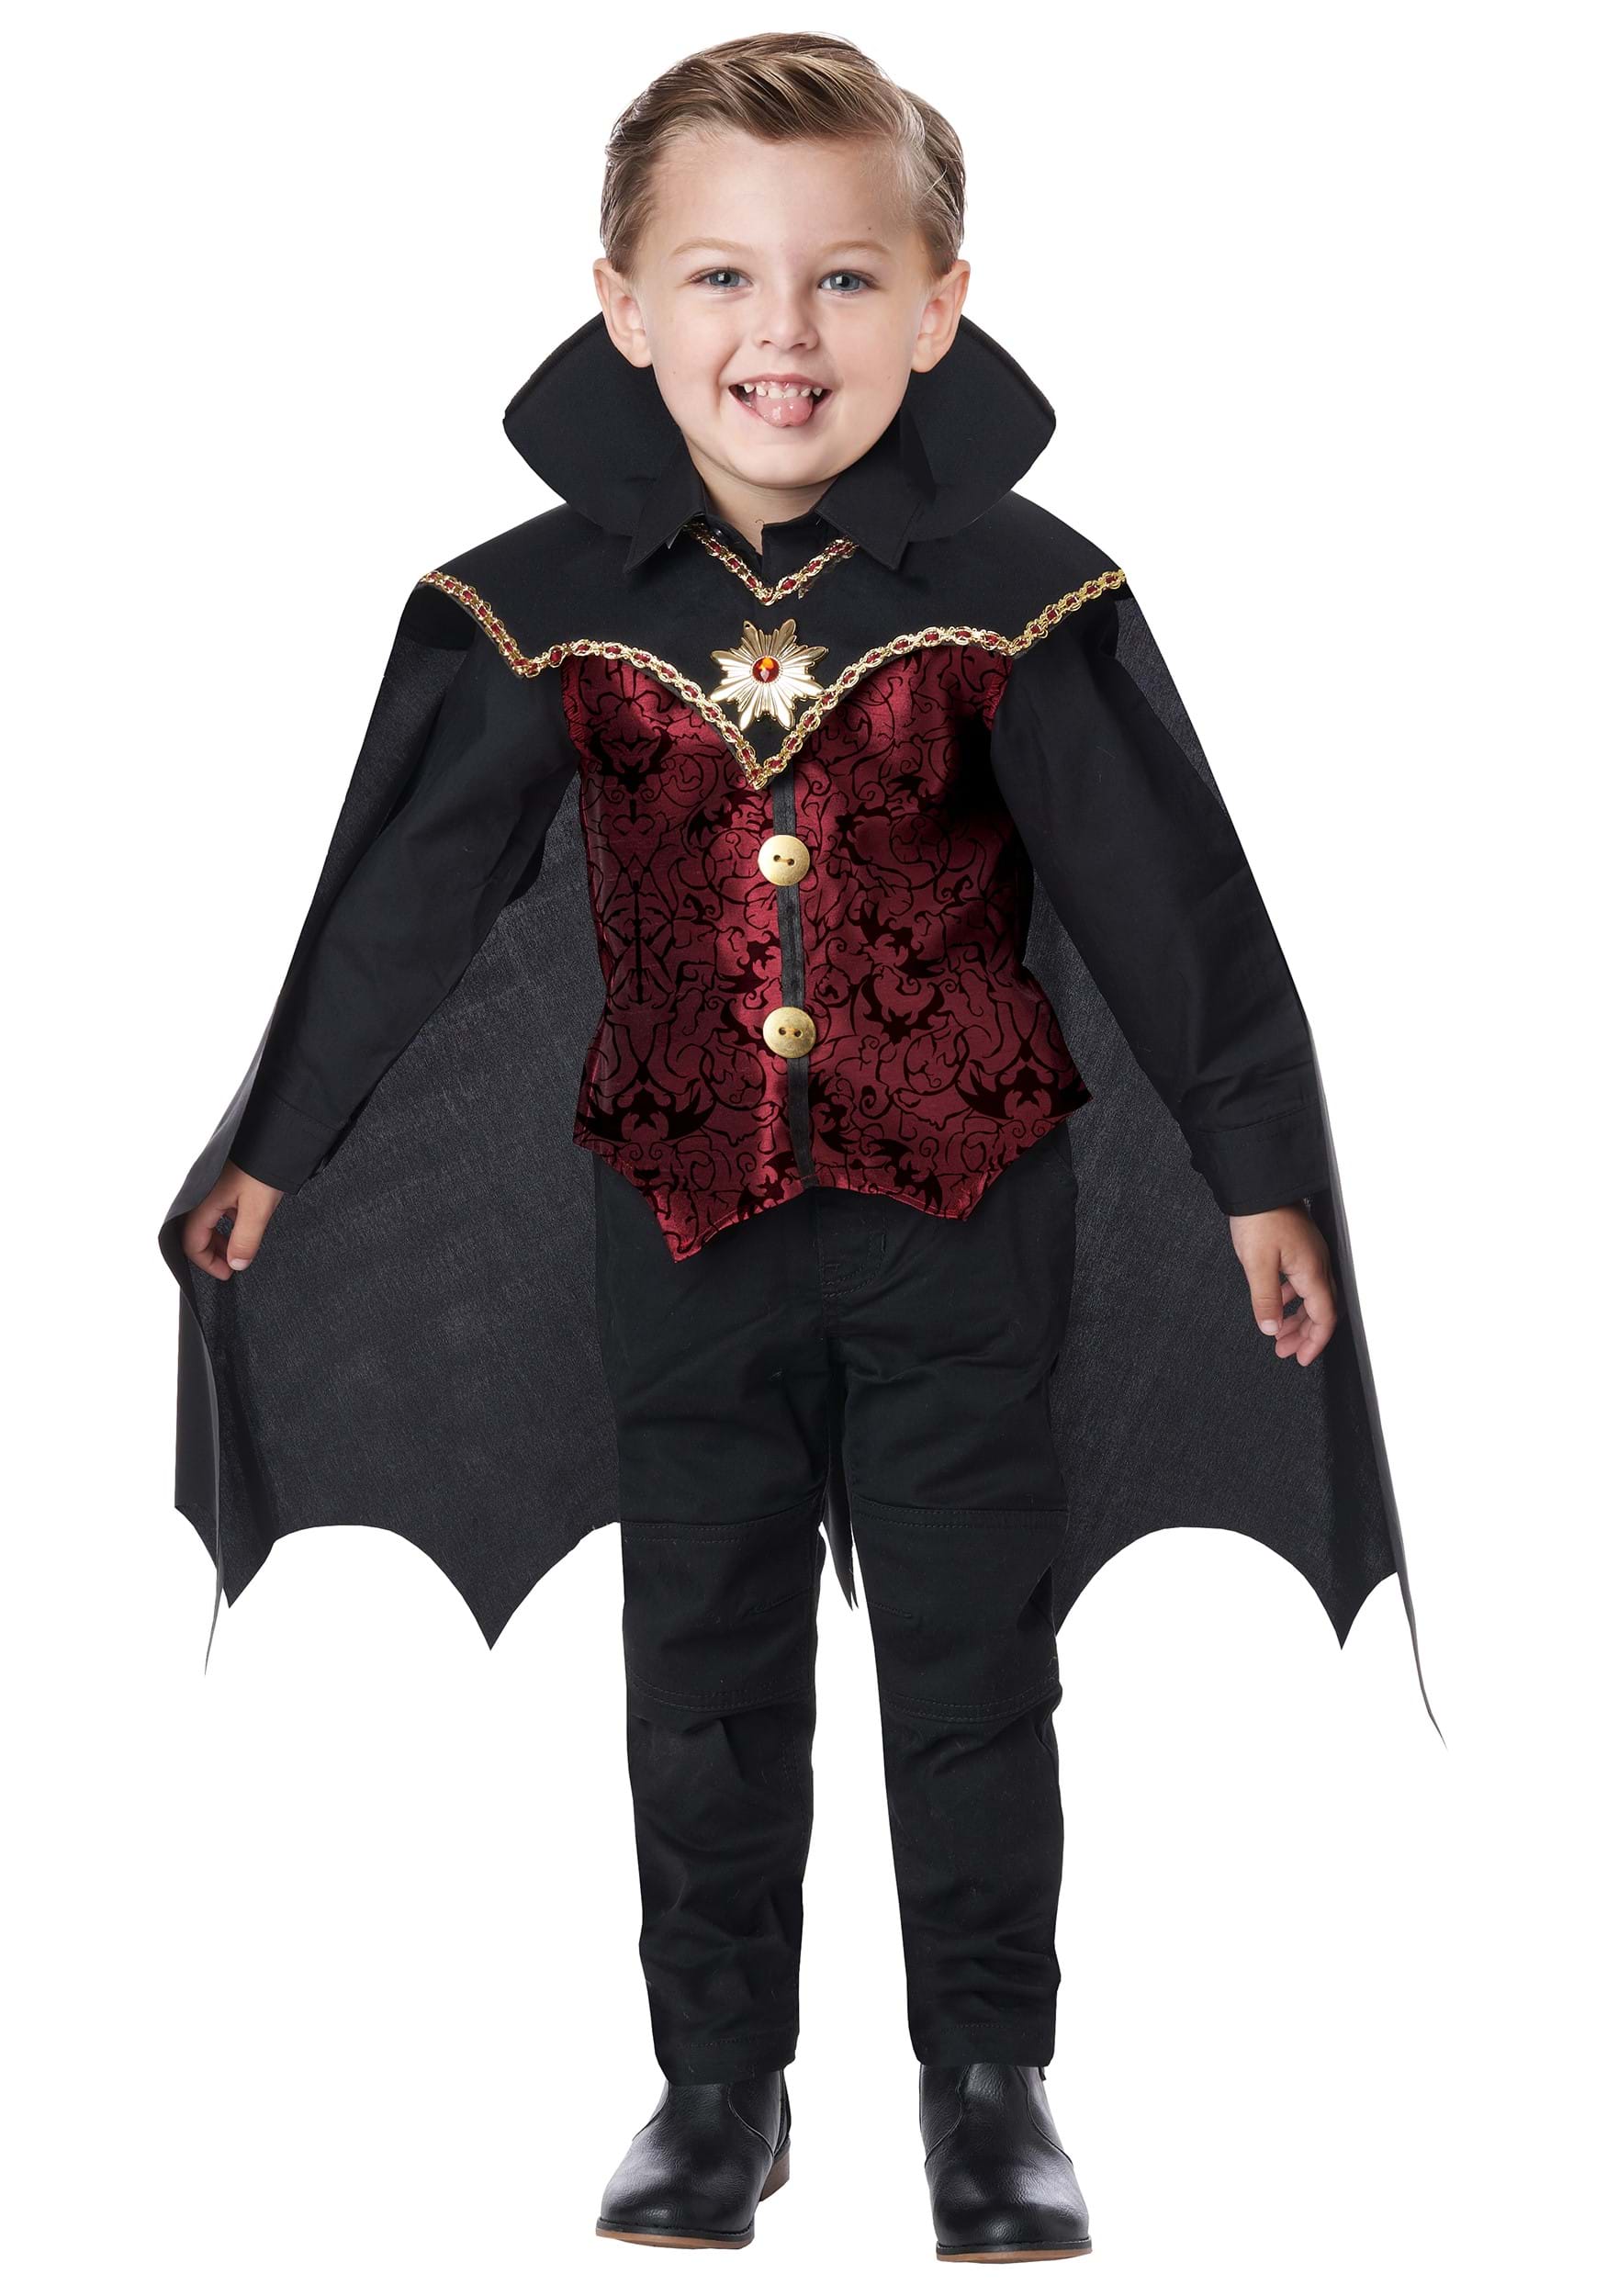 Photos - Fancy Dress California Costume Collection Swanky Vampire Toddler Costume Black/Red